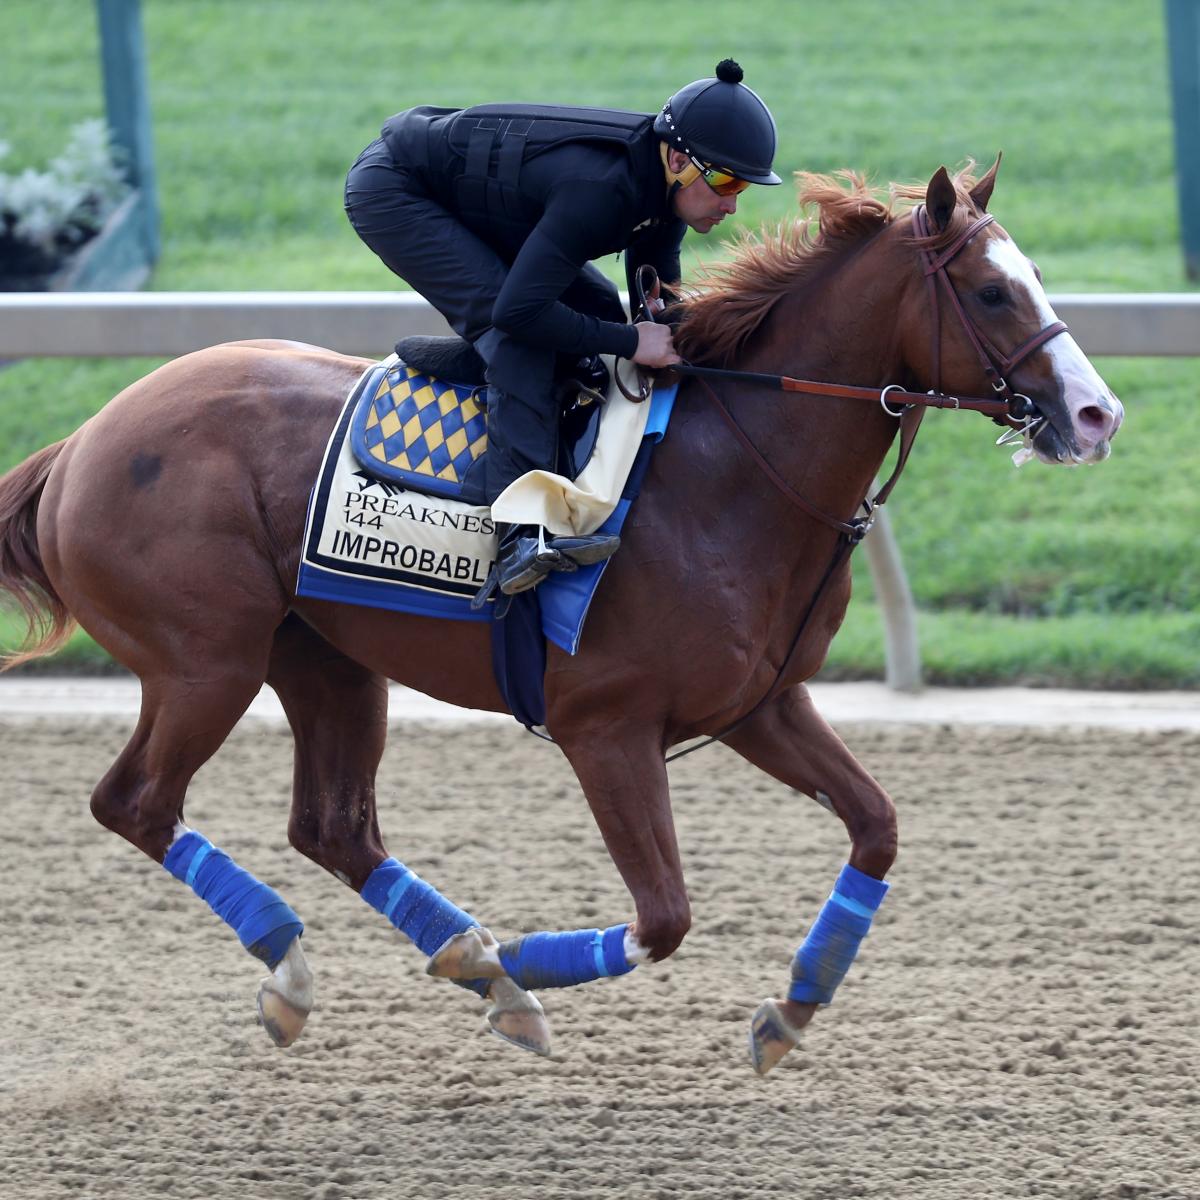 Preakness Odds 2019 Post Positions Info and Vegas Lines for All Horses